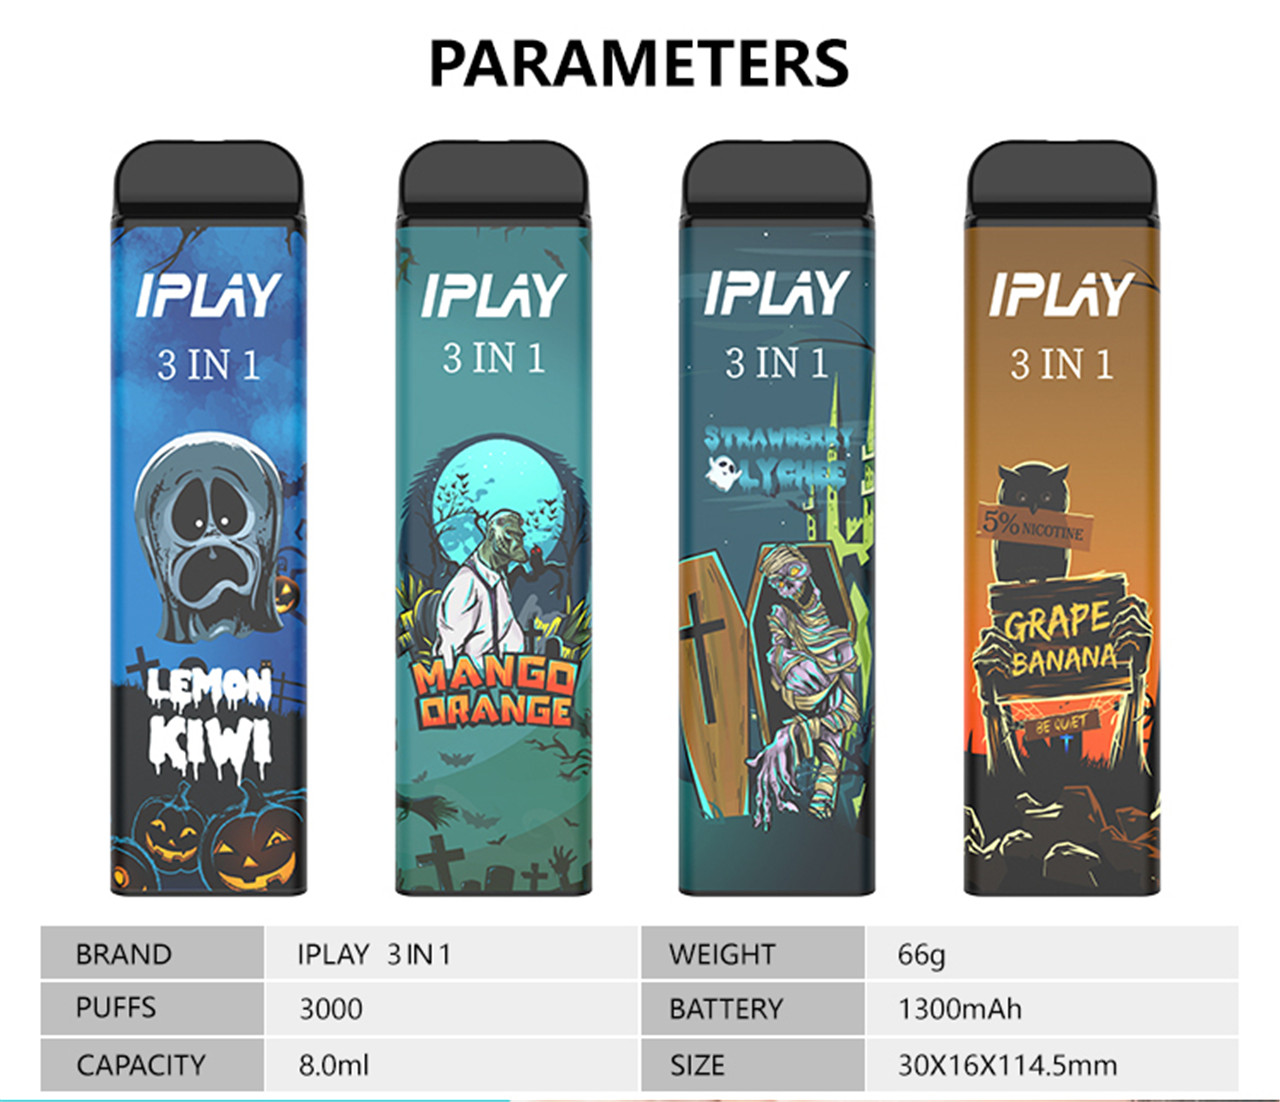 IPLAY 3 IN 1 Disposable Pod - Parameter